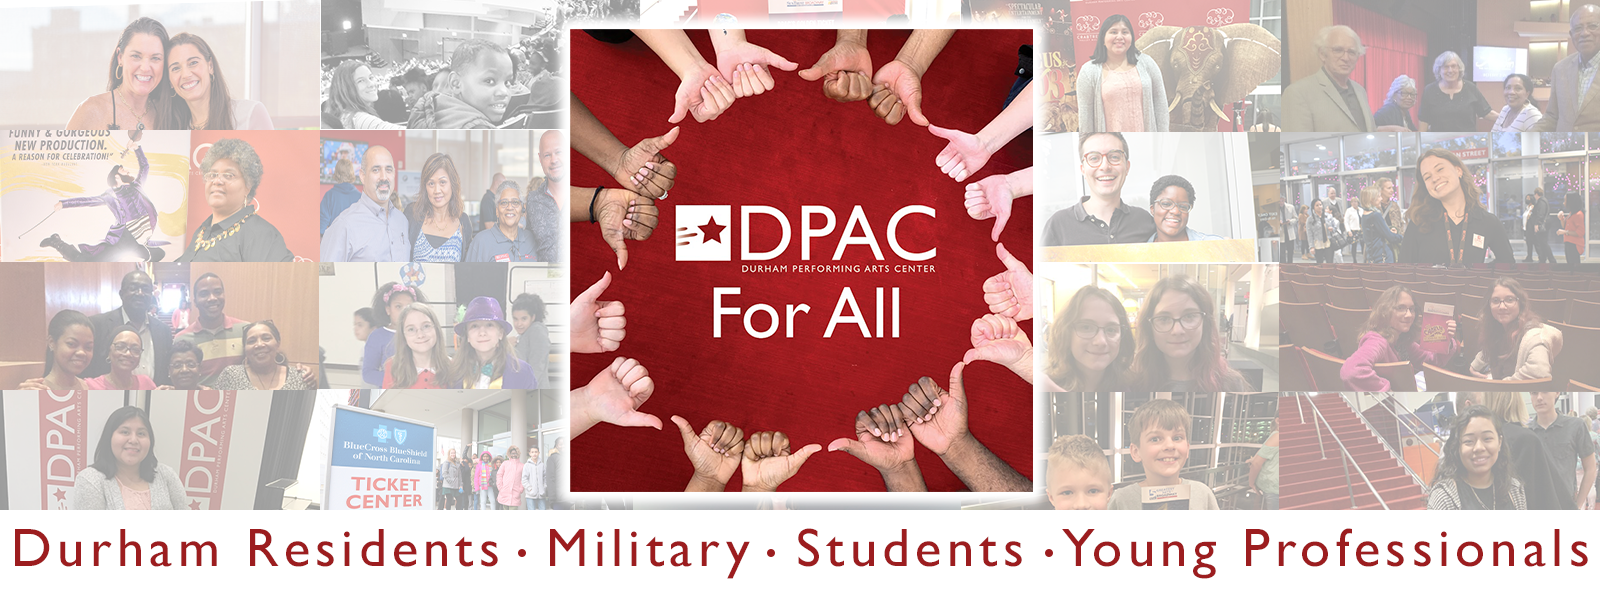 DPAC For All DPAC Official Site